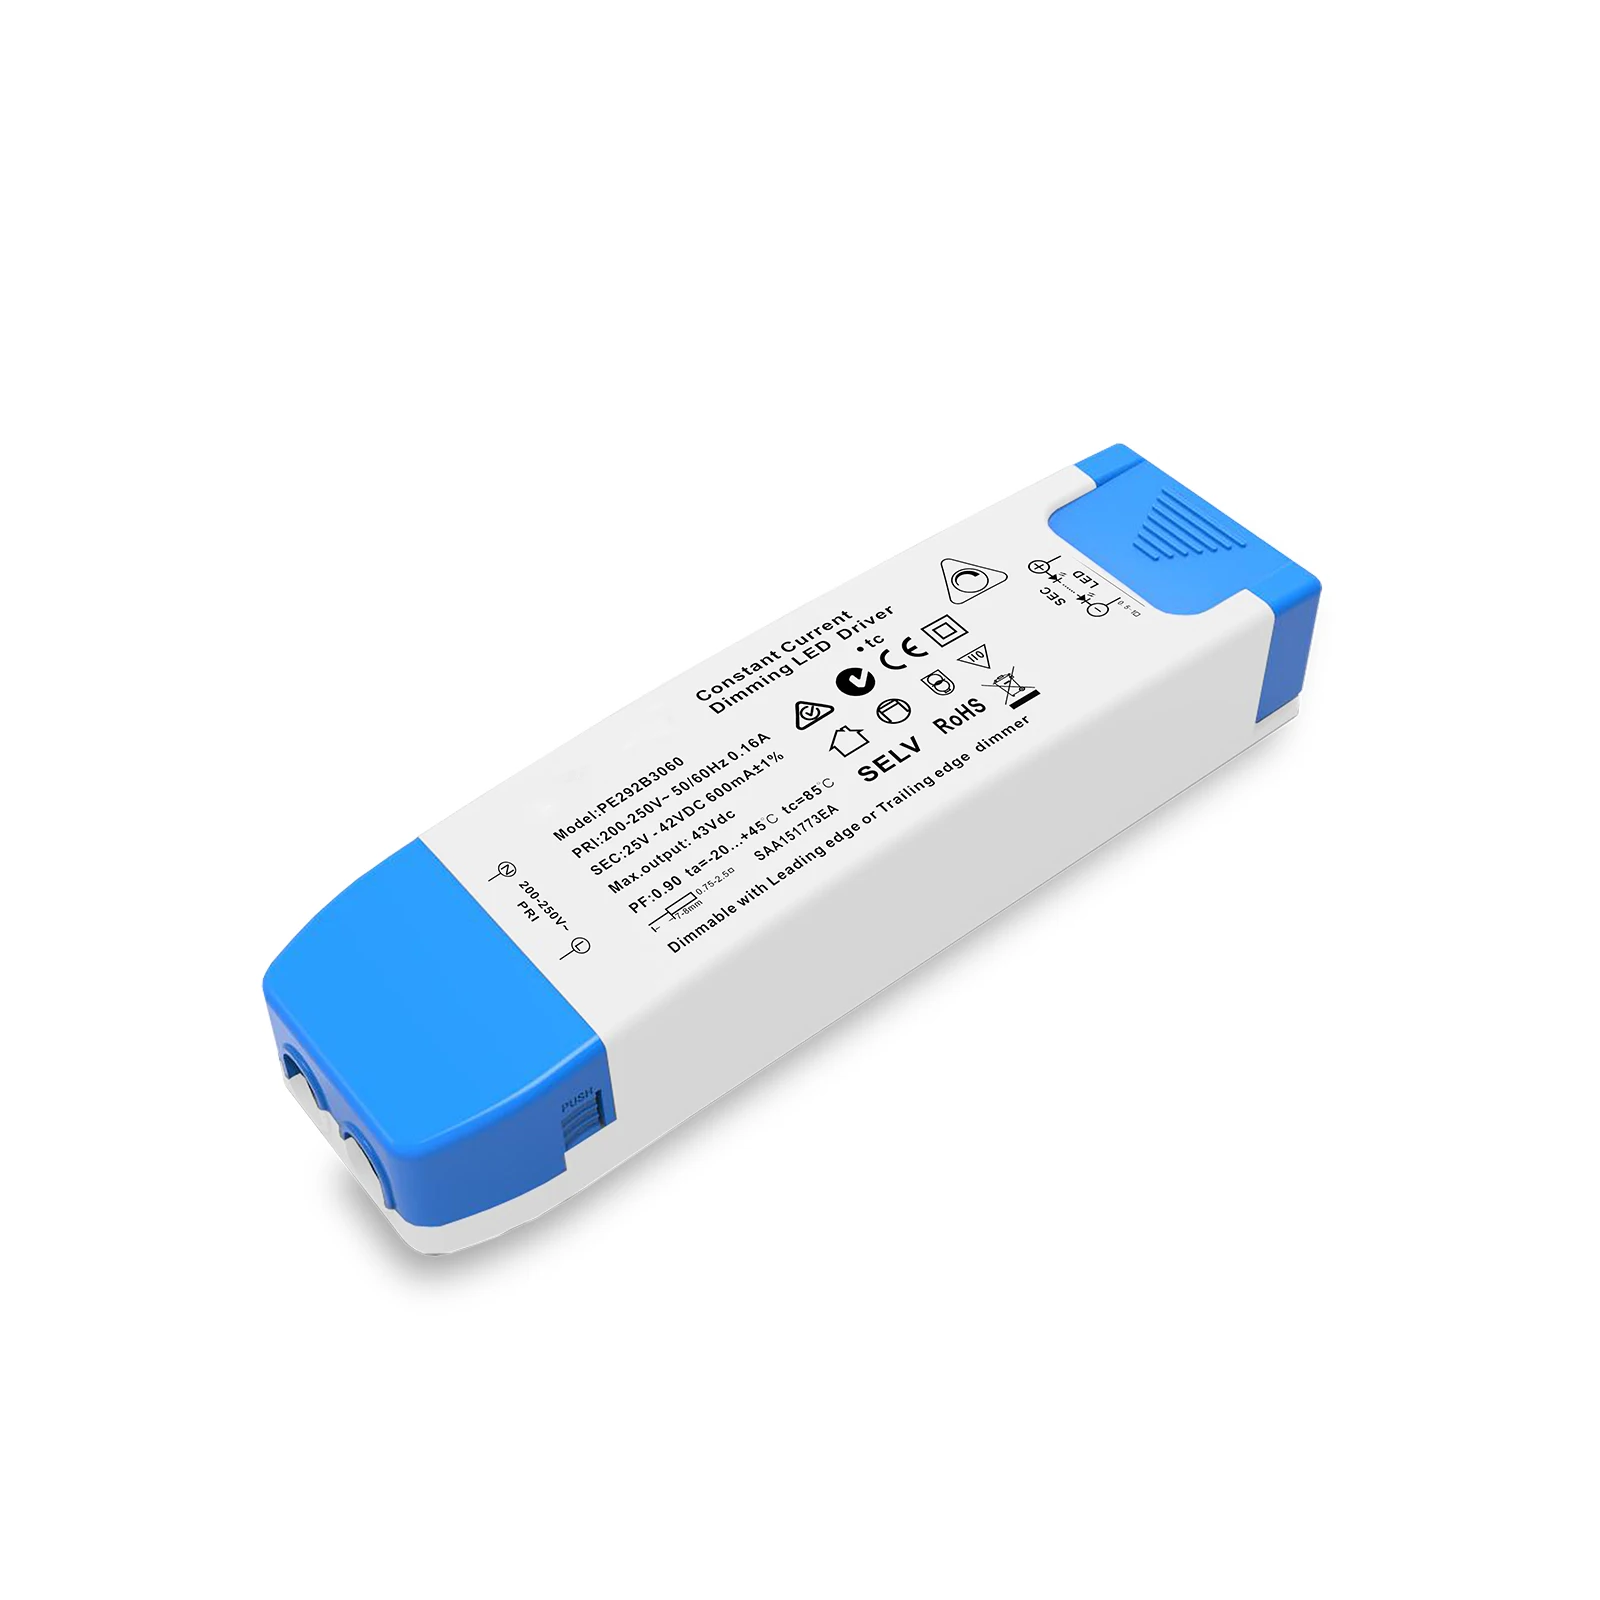 Source PE292B2455 550ma triac constant current dimmable led driver 25-42V on